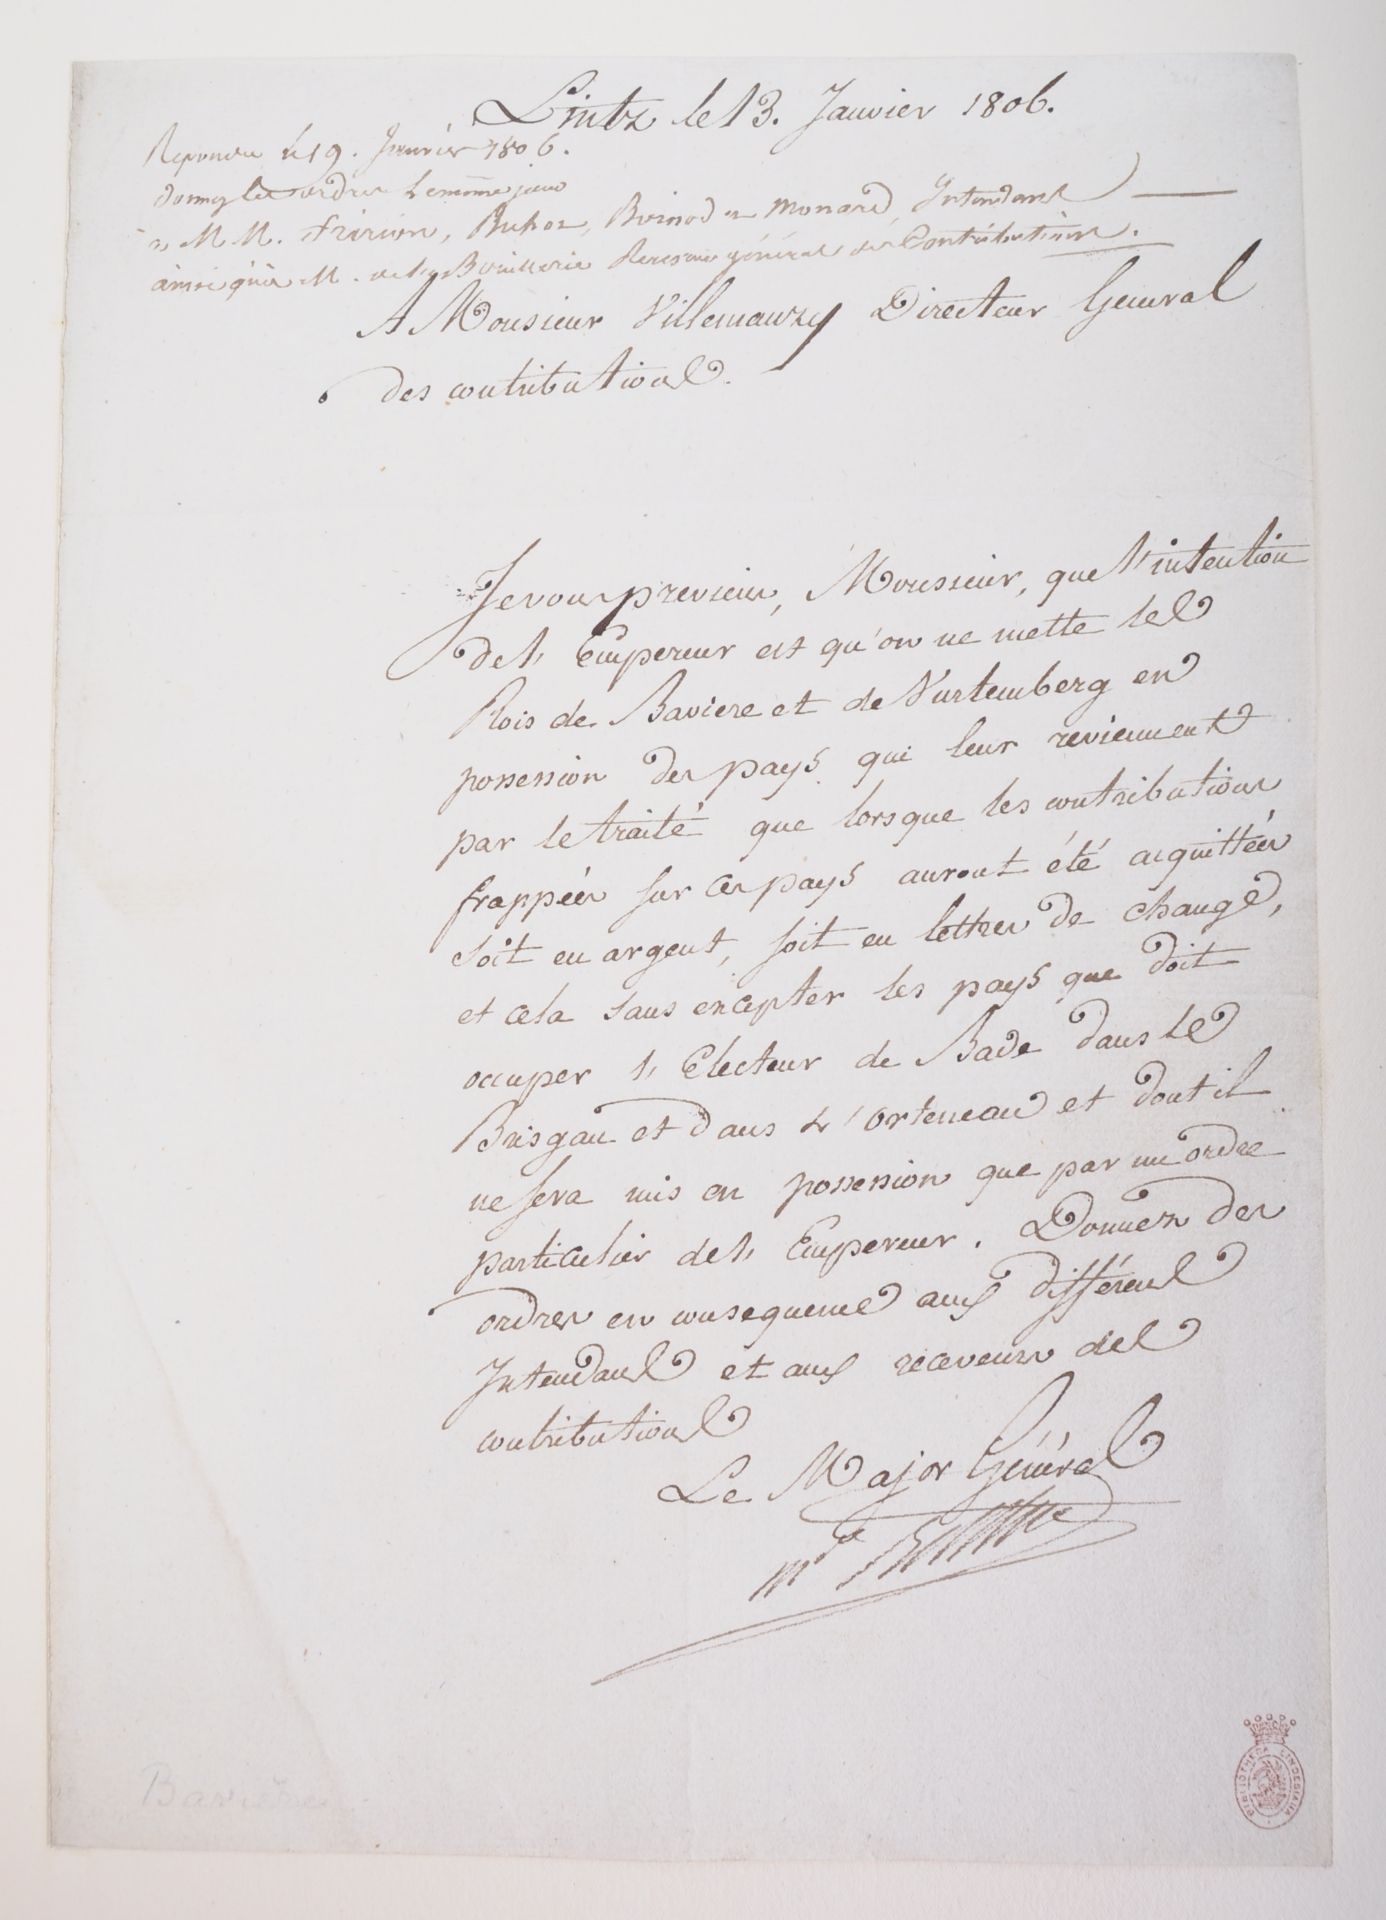 NAPOLEONIC WARS - EXCEPTIONAL COLLECTION OF LETTERS - Image 98 of 216